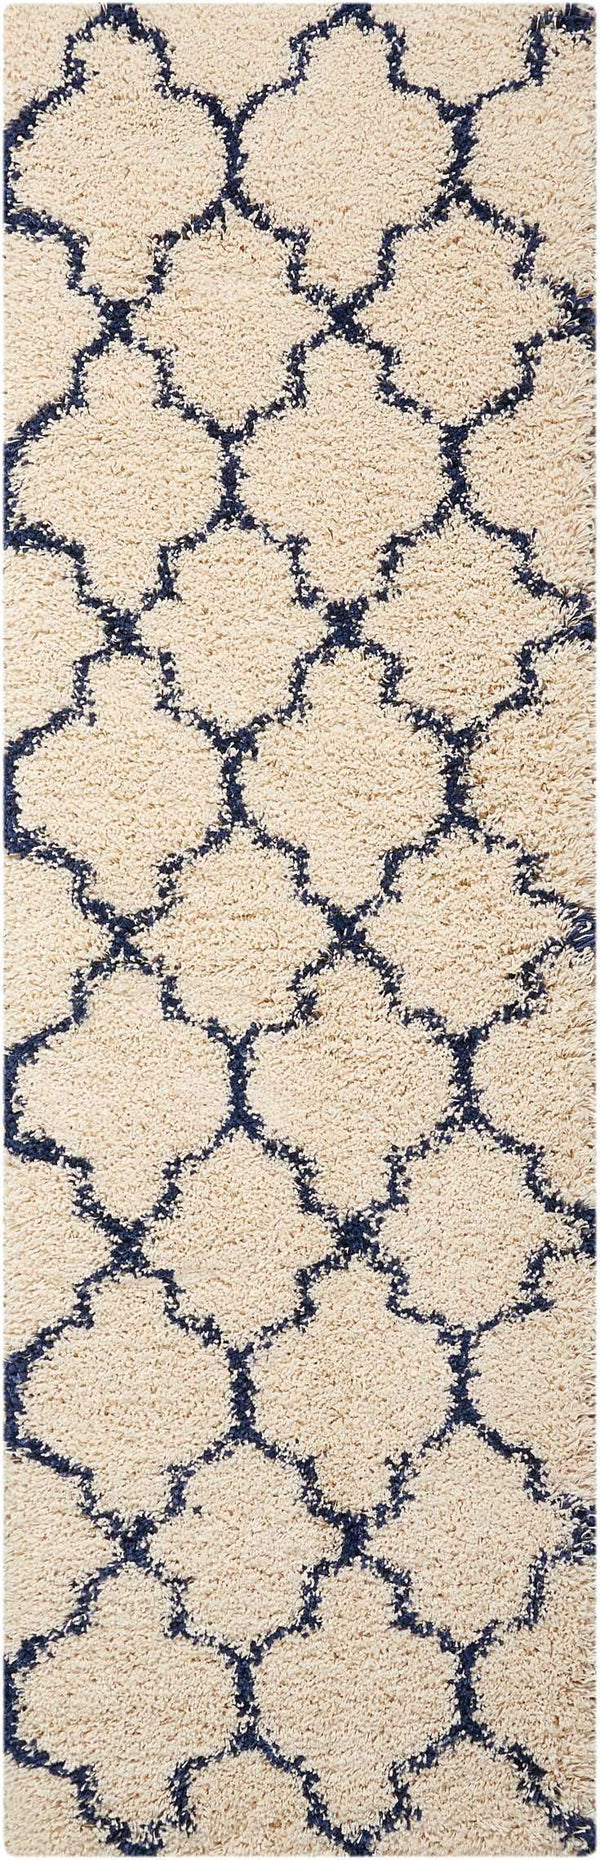 Runner Nourison Shag Rugs Amore Collection By Nourison Amor2 Ivory-Blue Unique Shapes and Sizes